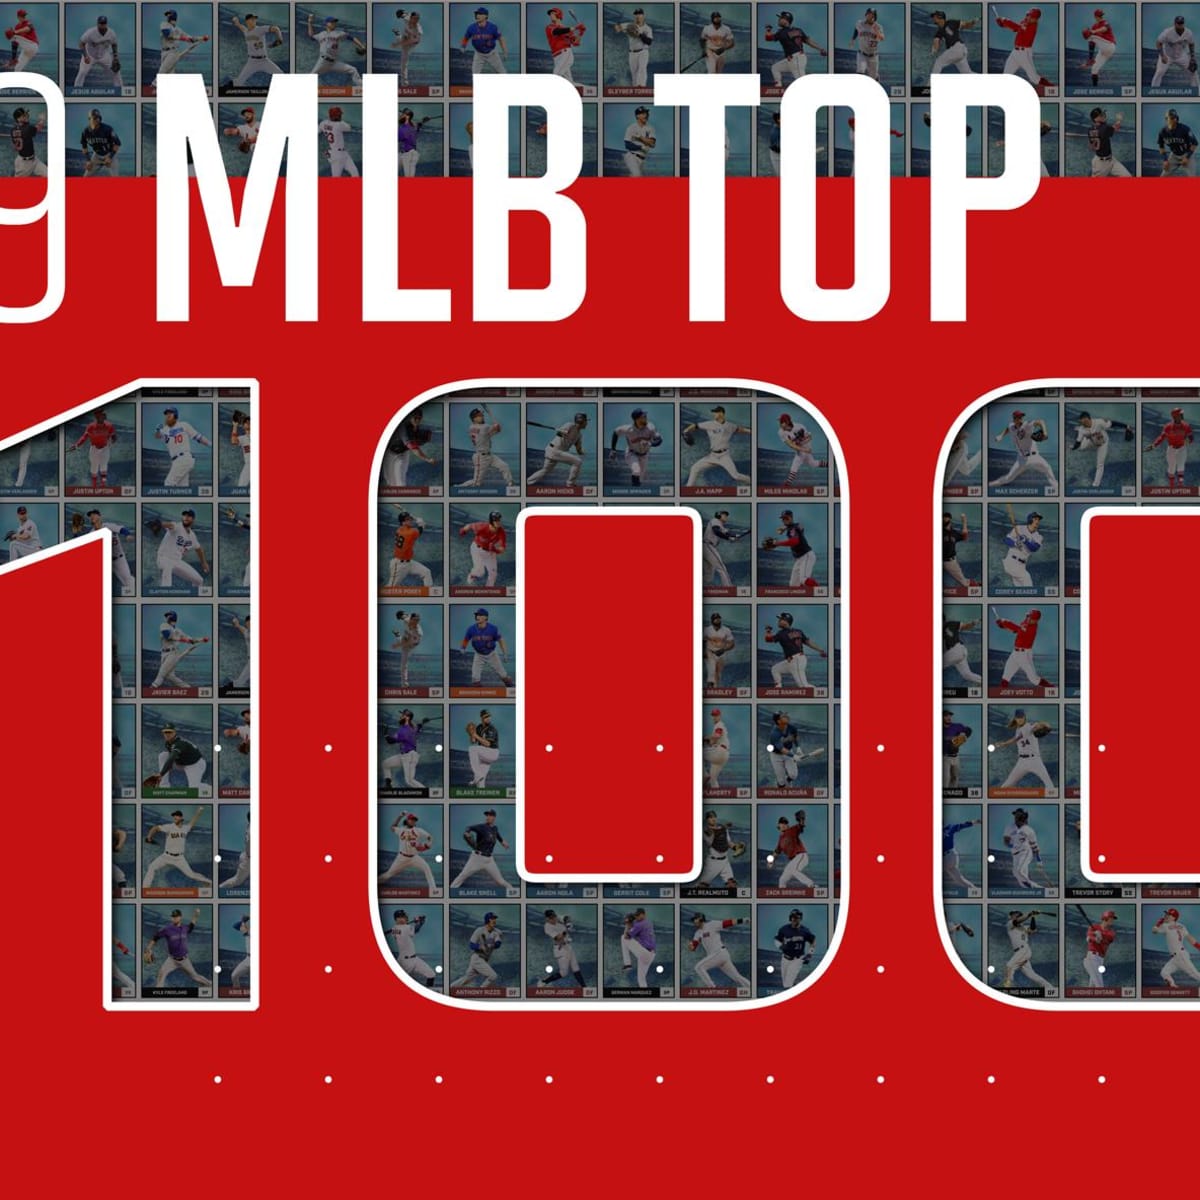 Top 100 Players  No 80 to 61  MLB Top 100  YouTube